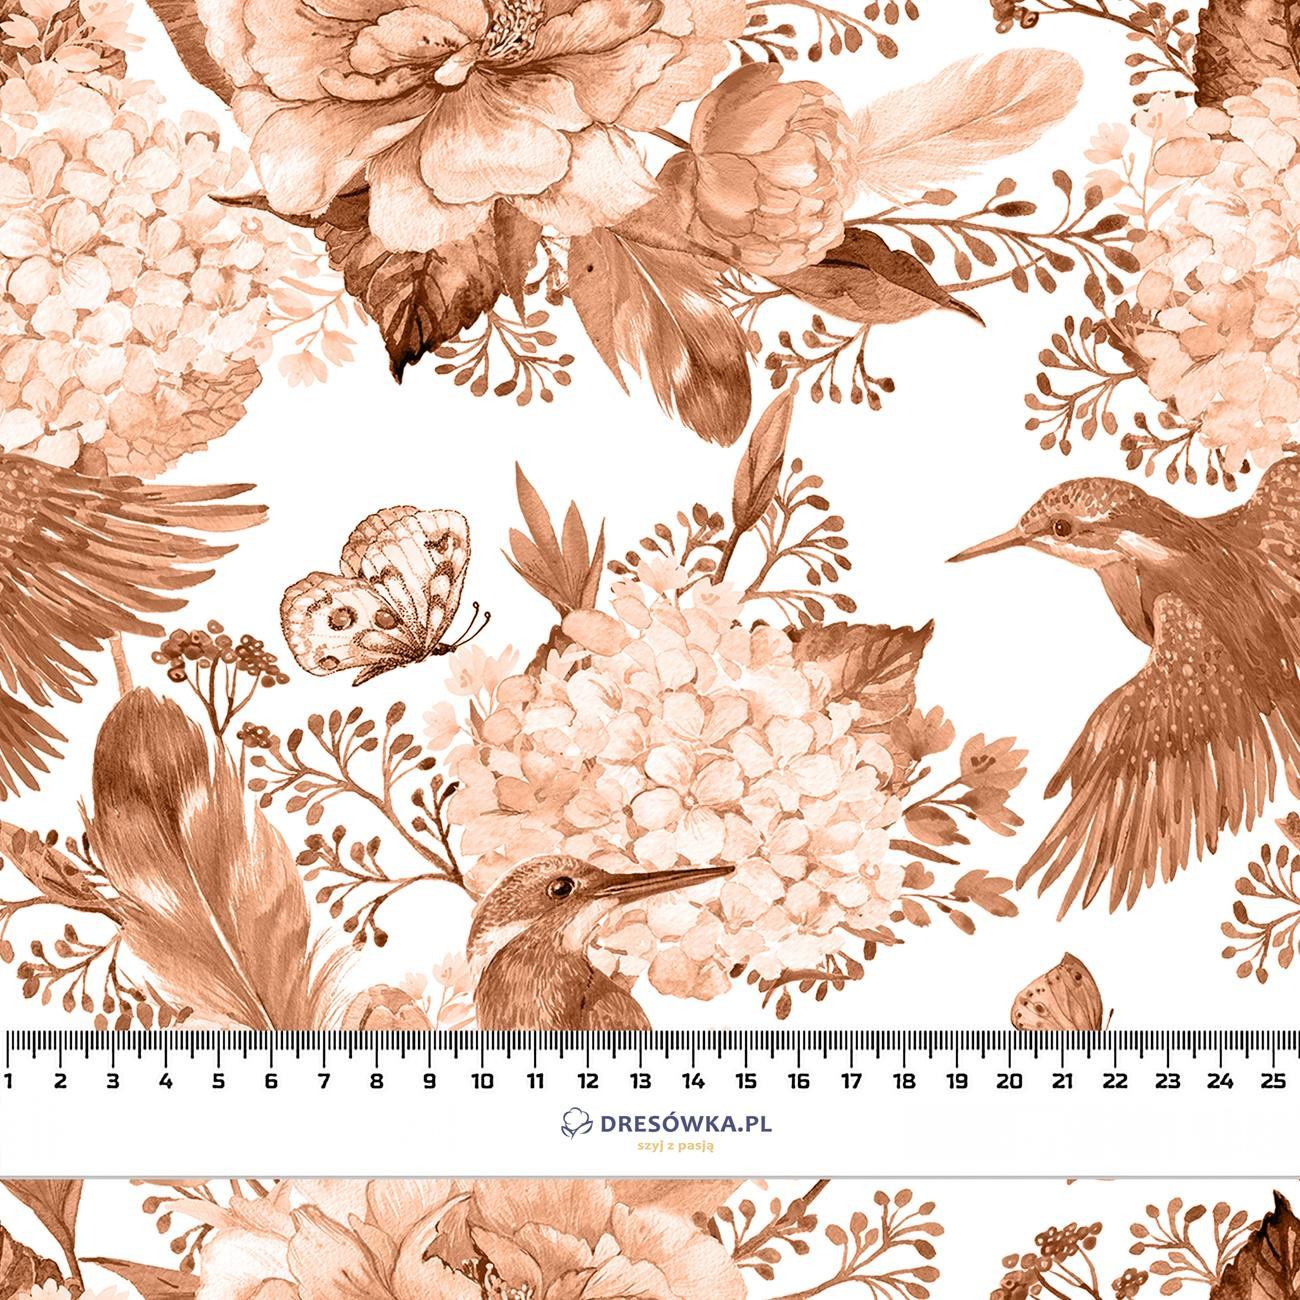 KINGFISHERS AND LILACS (KINGFISHERS IN THE MEADOW) / peach fuzz - Linen 100%